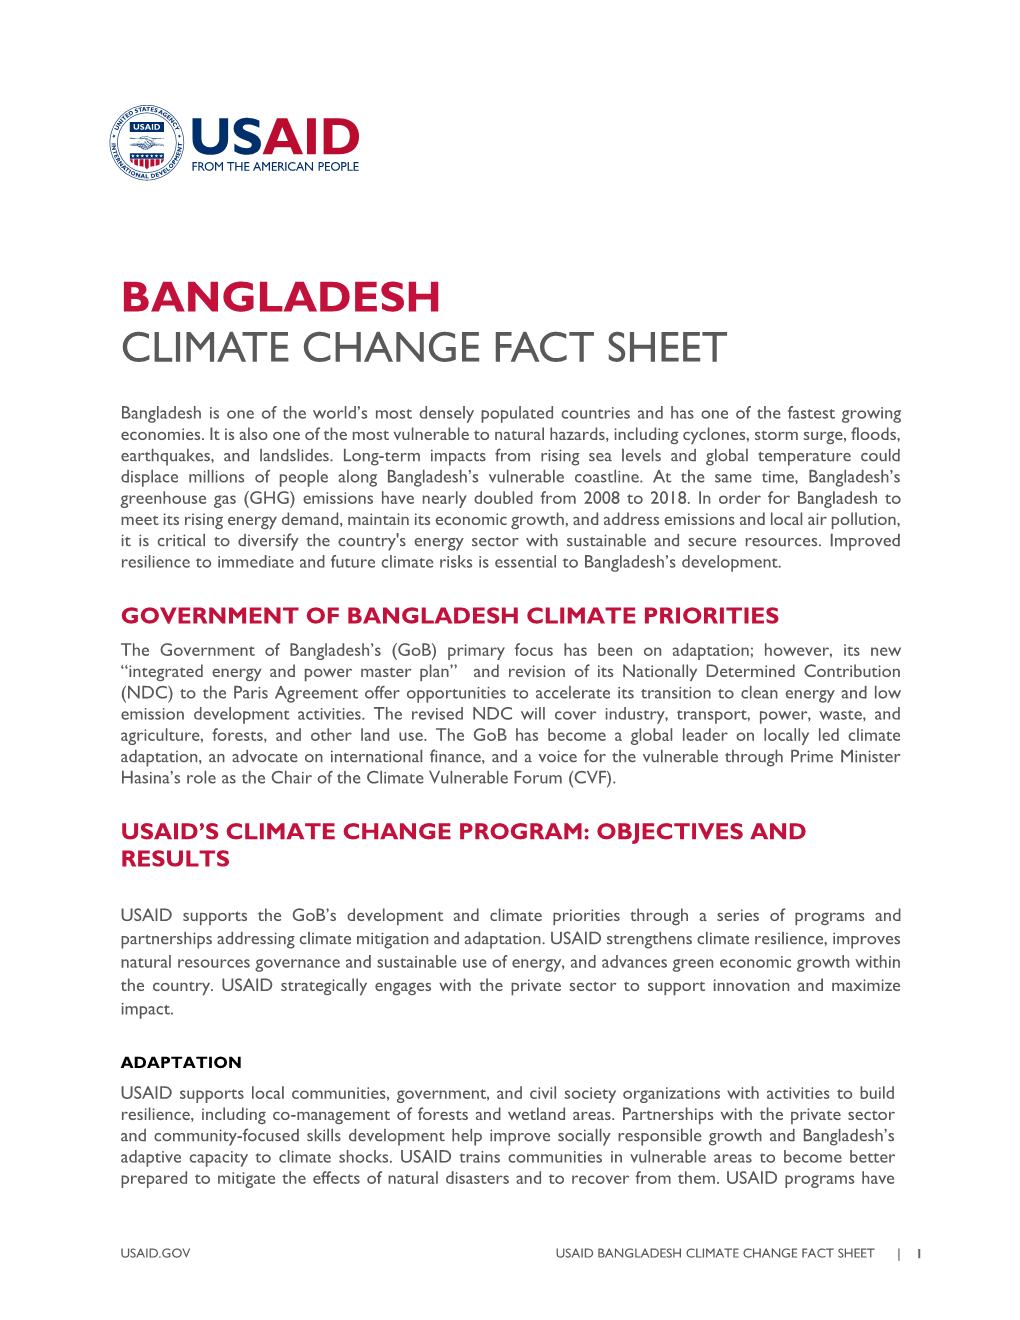 USAID BANGLADESH CLIMATE CHANGE FACT SHEET | 1 Built Cyclone Shelters and Established Early Warning Systems